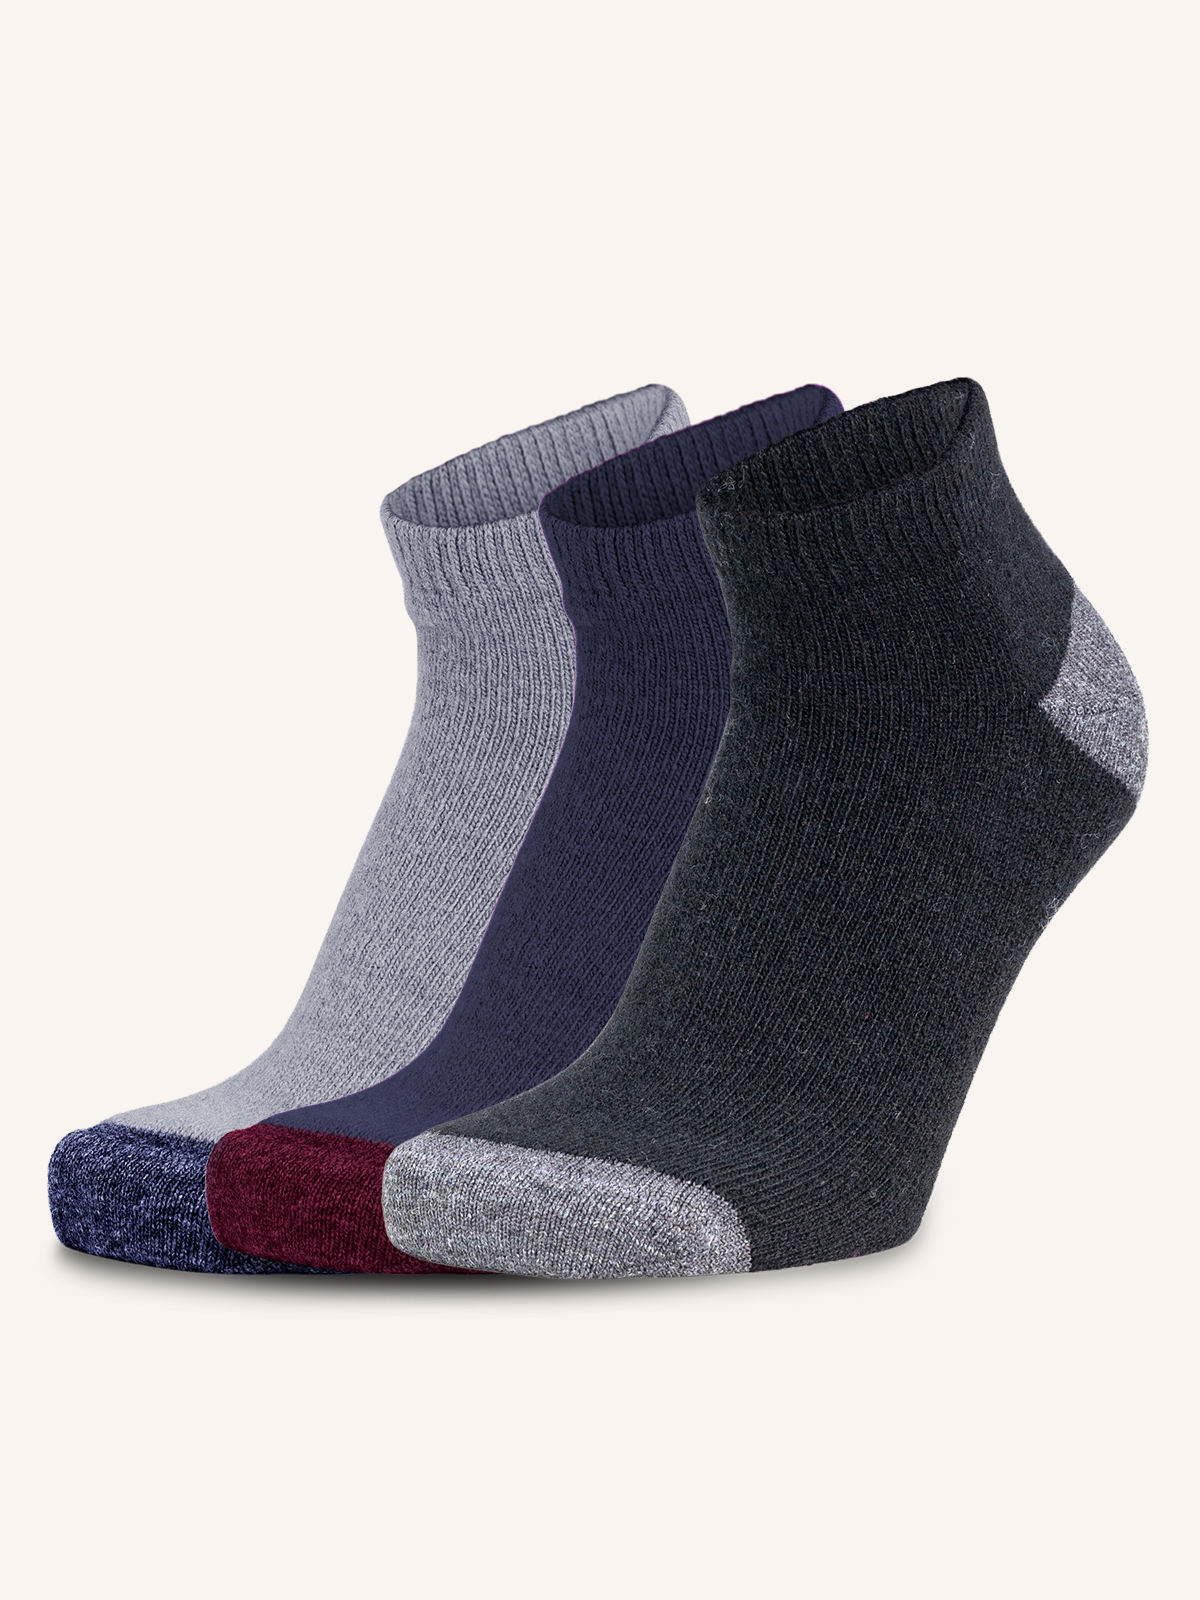 Pariscarpa Ribbed Sock in Cashmere and Wool Blend for Women | Plain Color | Pack of 3 pairs | Cachelife DP